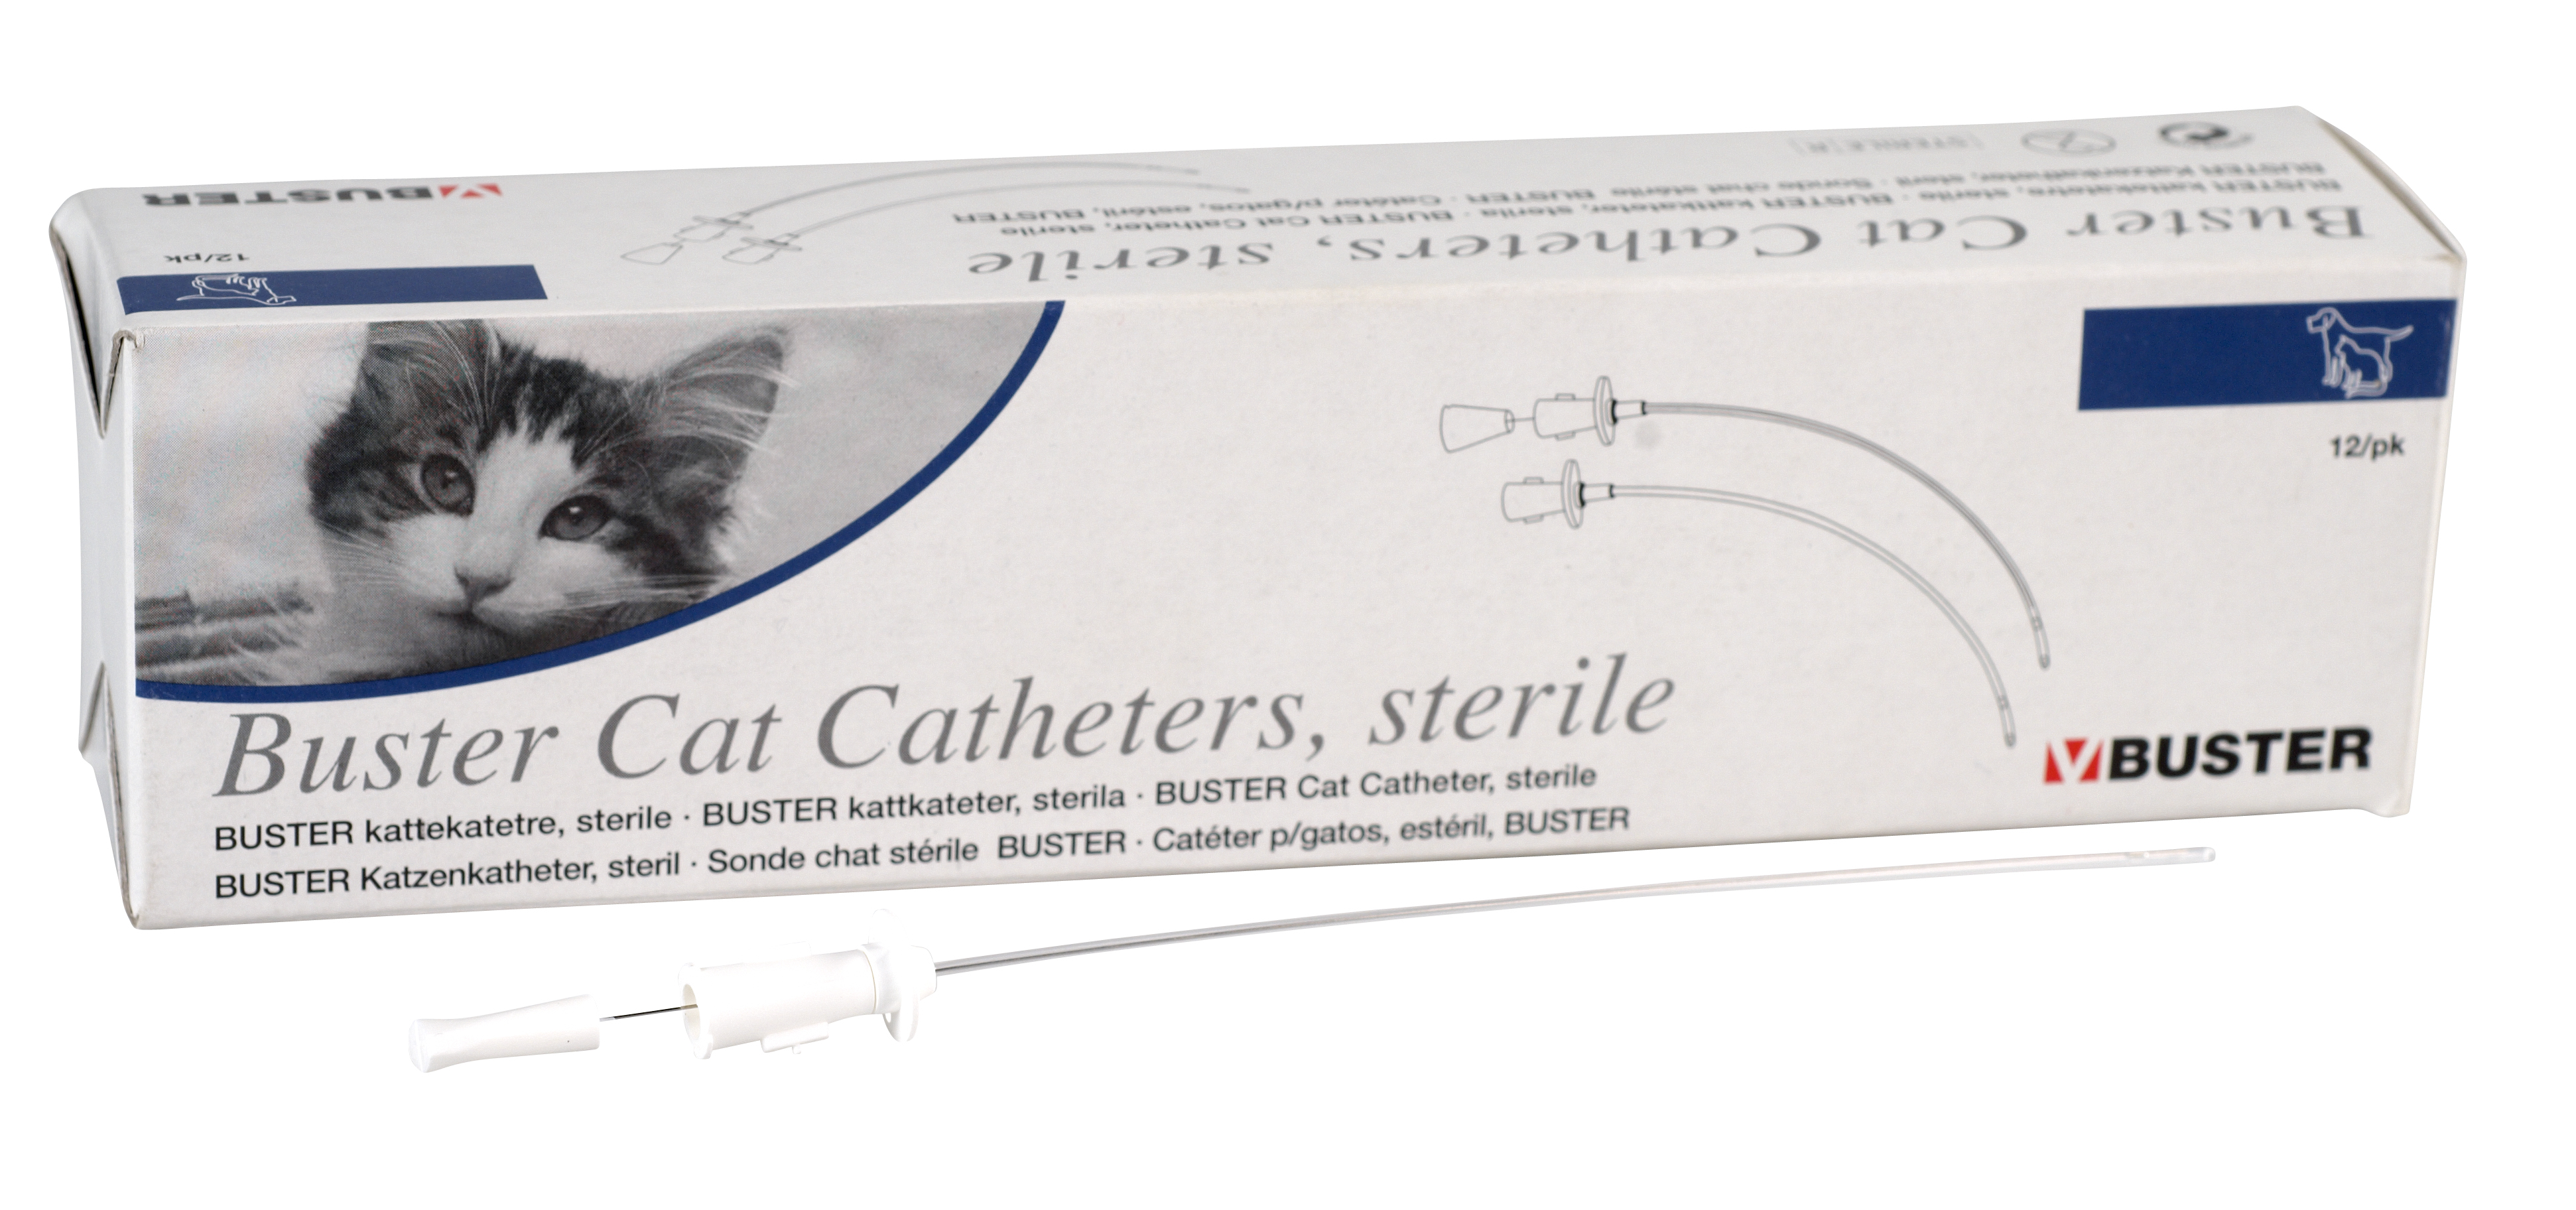 BUSTER cat catheter w/stylet sterile, 1.3 x 130 mm